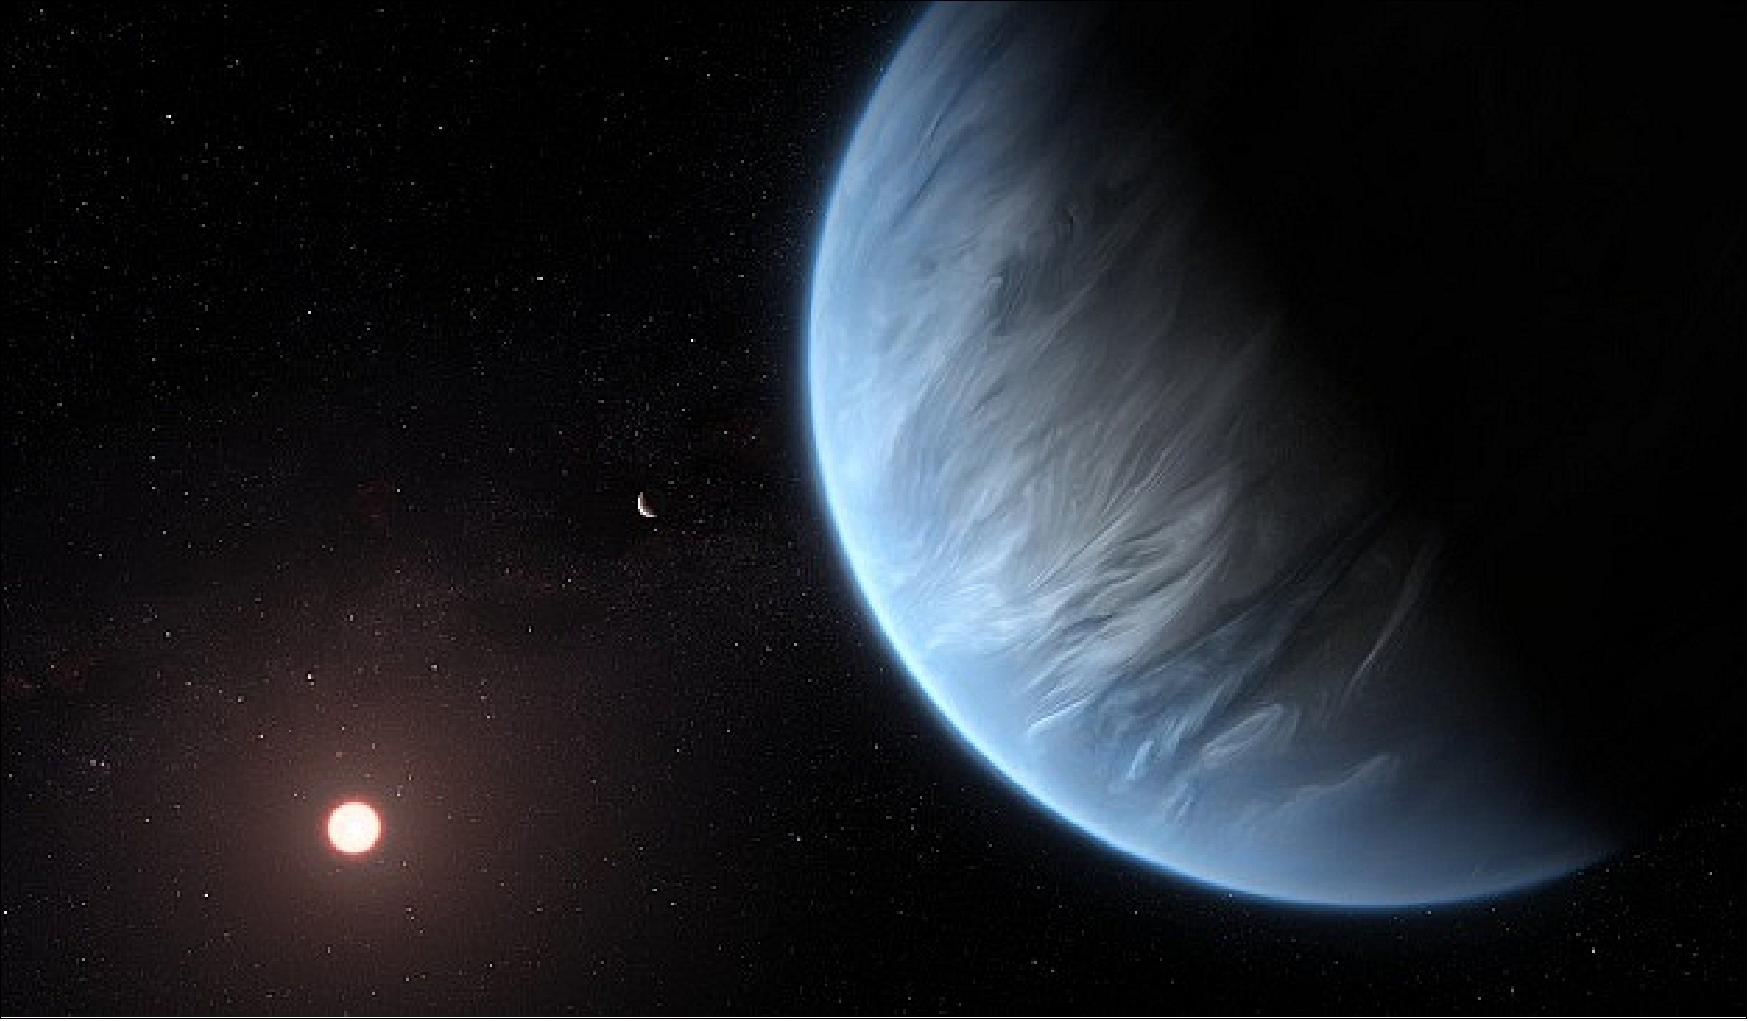 Figure 27: This artist's impression shows the planet K2-18b, it's host star and an accompanying planet in this system. K2-18b is now the only super-Earth exoplanet known to host both water and temperatures that could support life (image credit: ESA/Hubble, M. Kornmesser, CC BY 4.0)